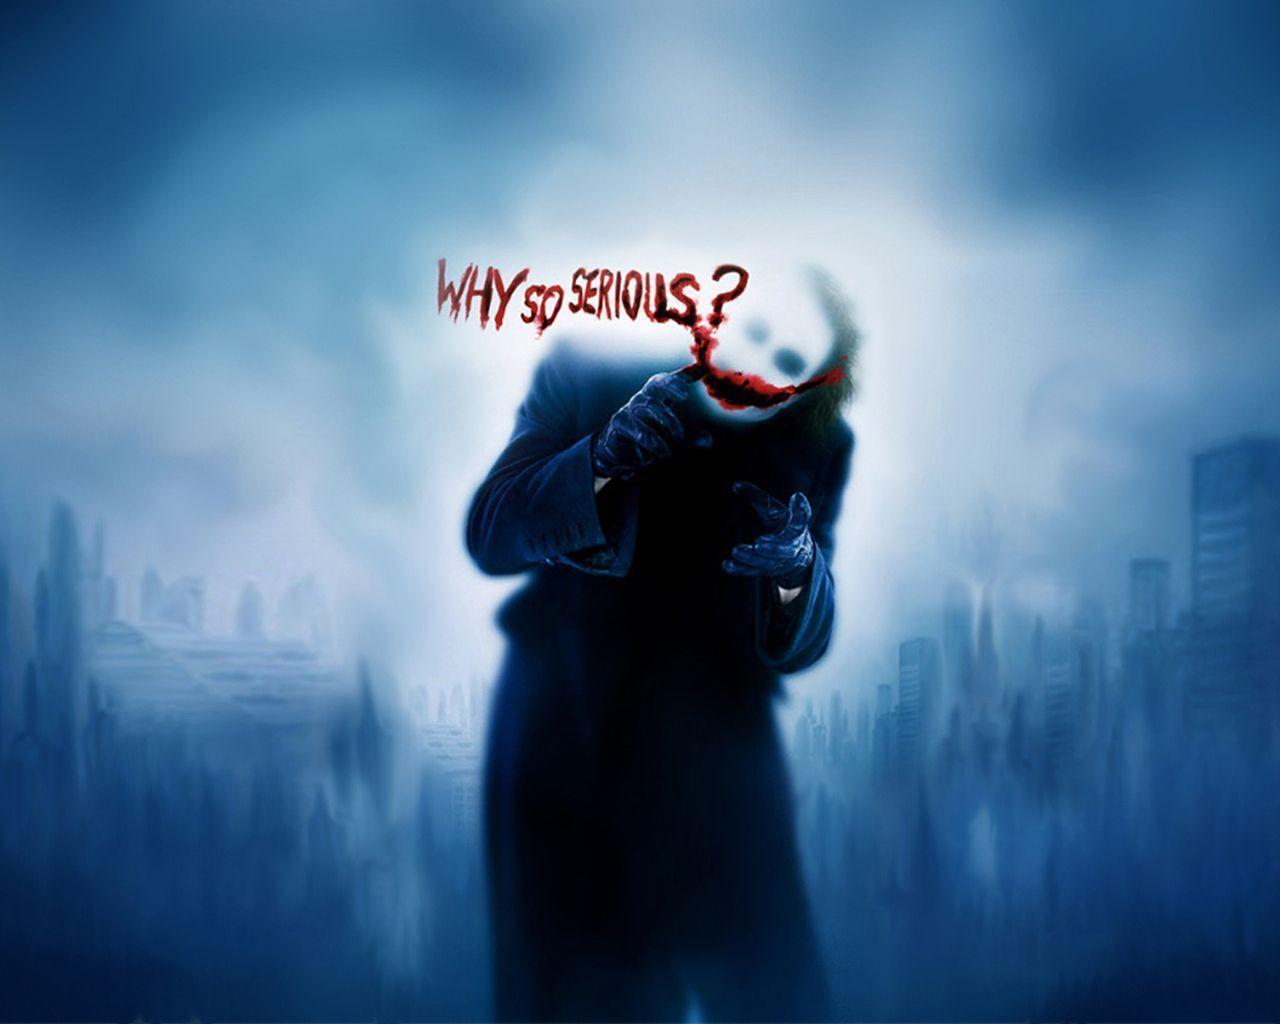 The best wallpaper of "The Joker" By Ngh_sick